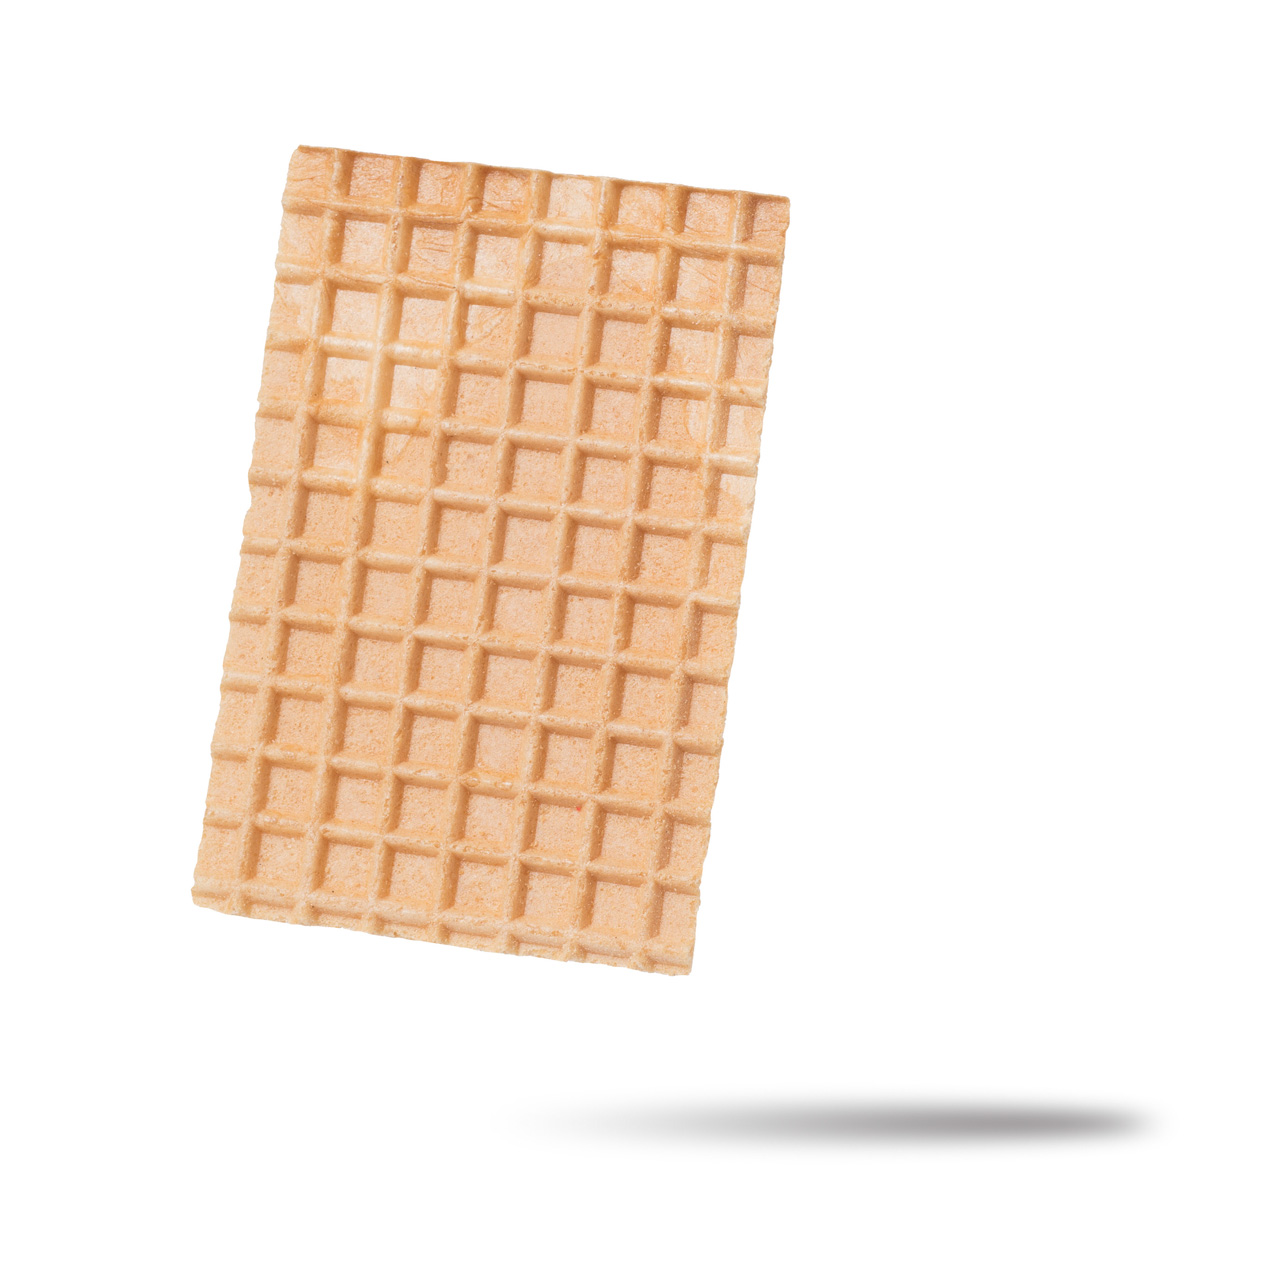 Squared wafers